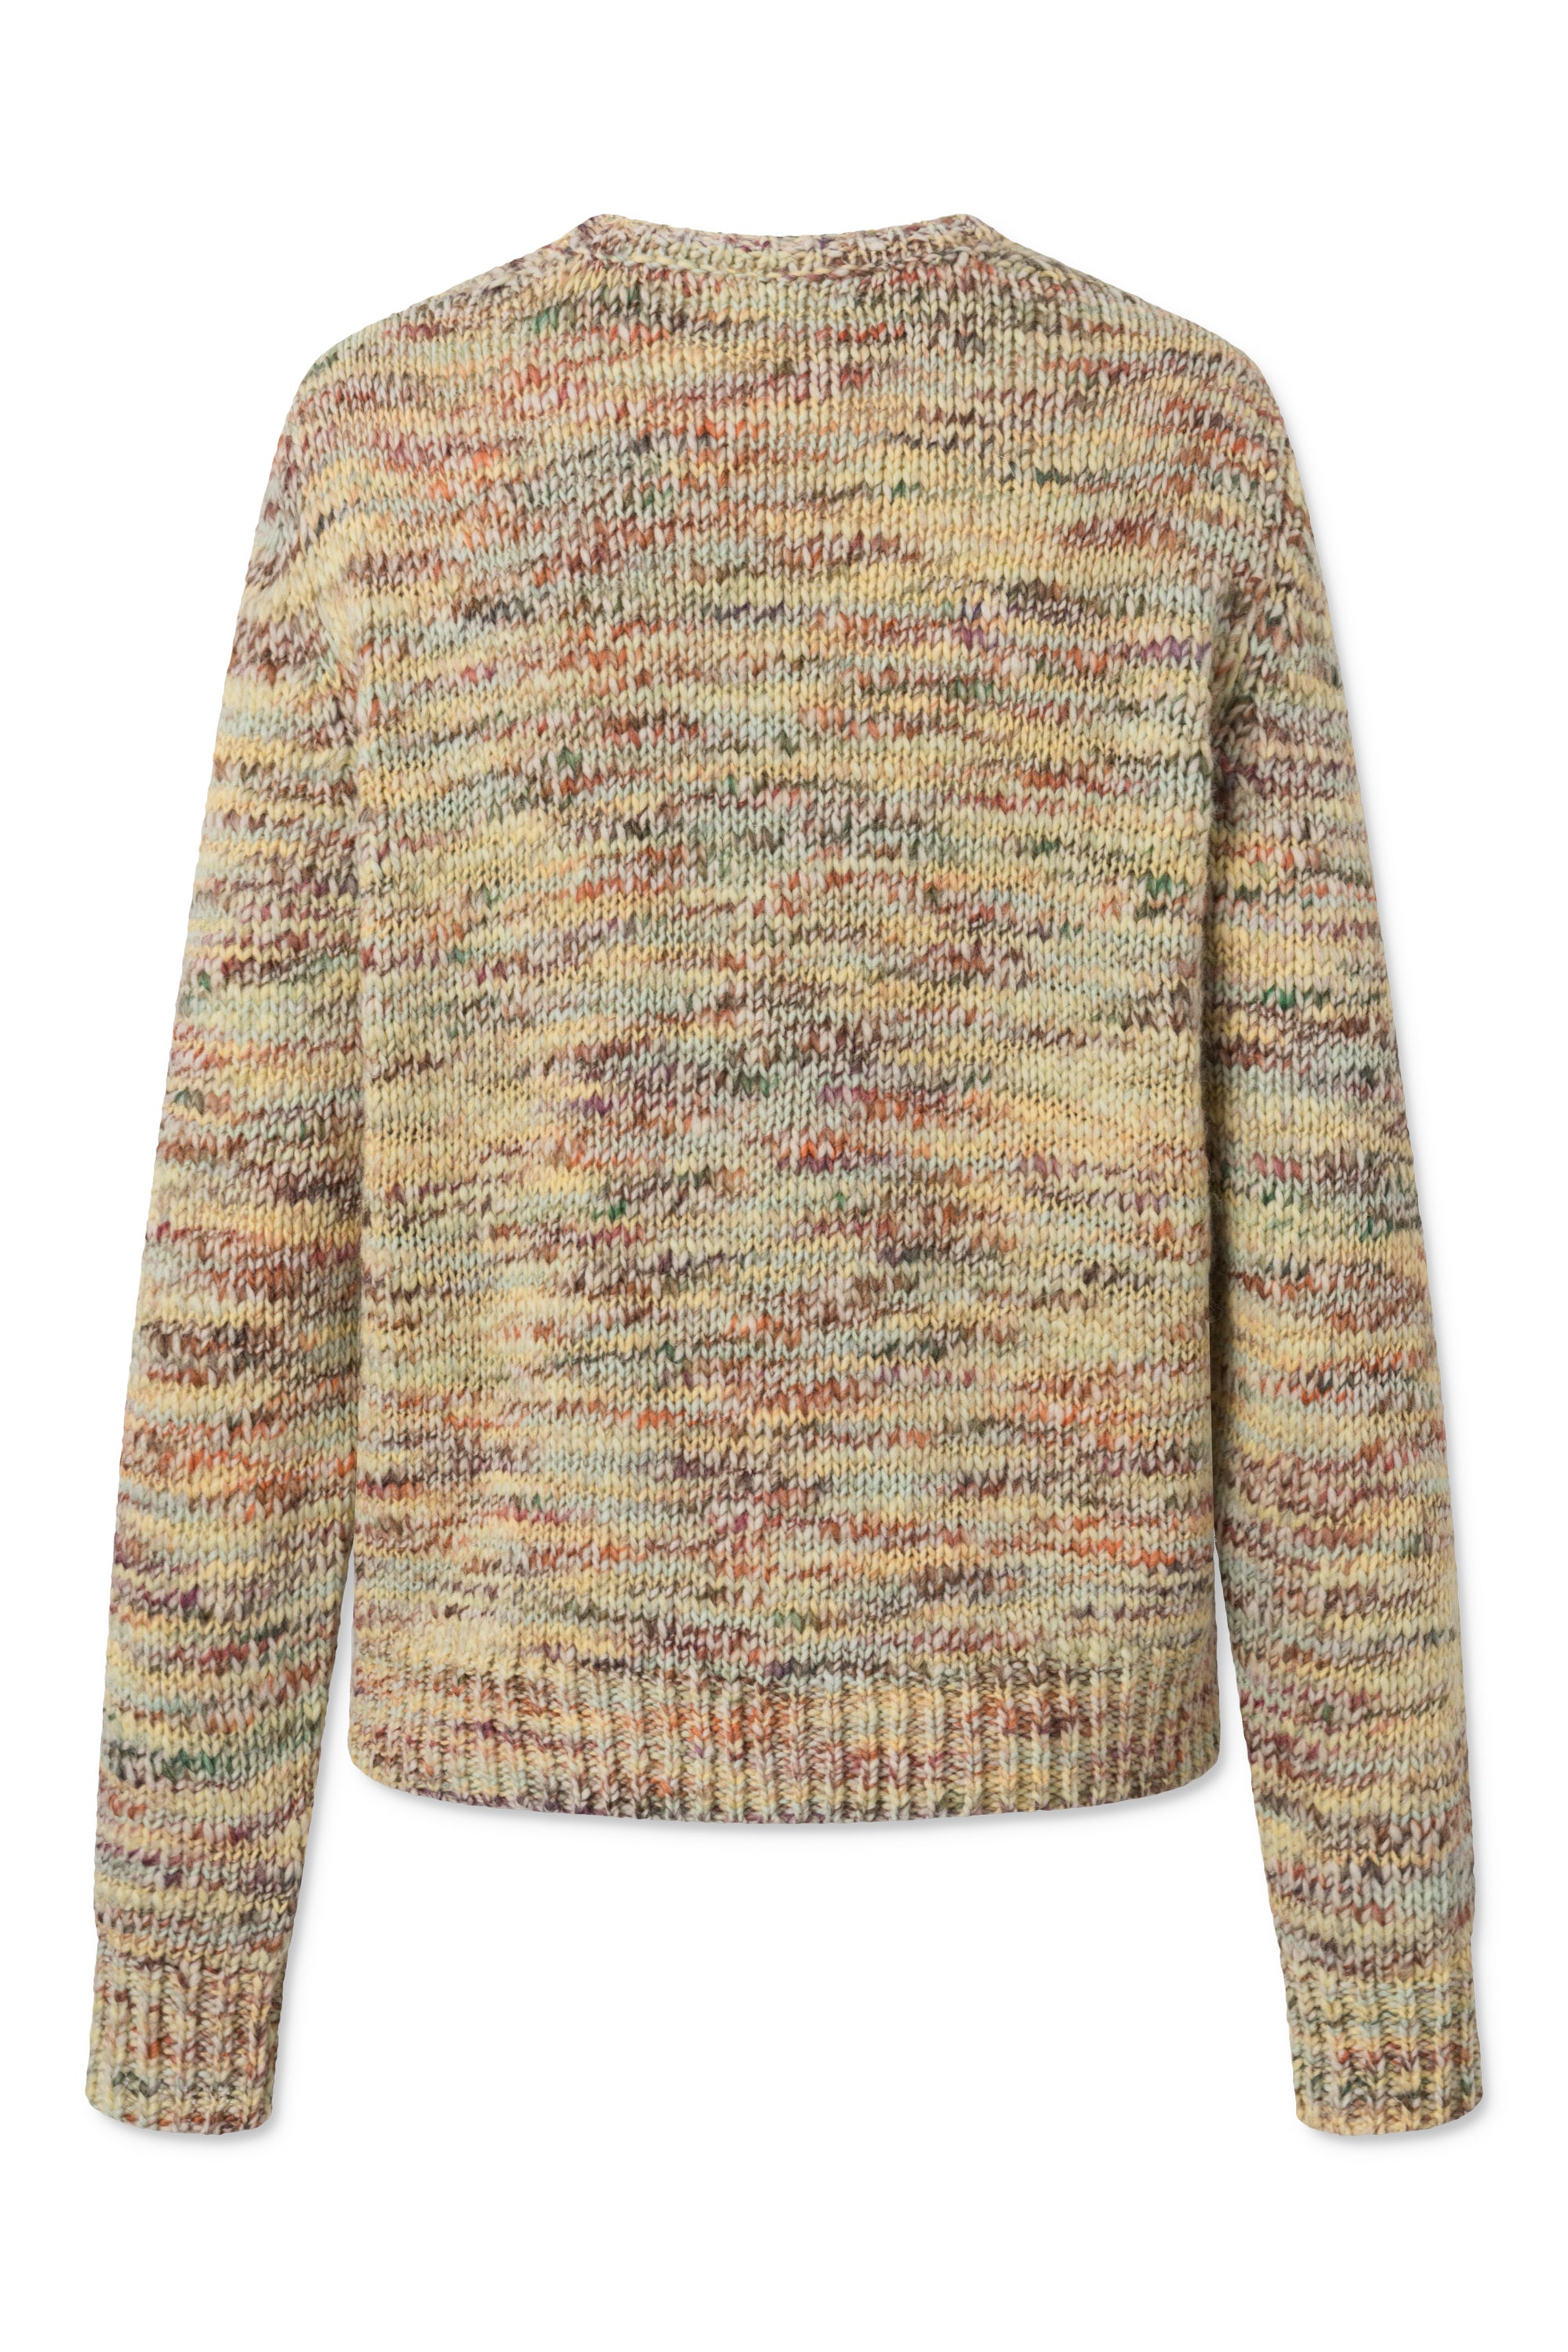 nué notes Vinny Pullover - Yellow Rainbow PULLOVERS 032 Multi Yellow